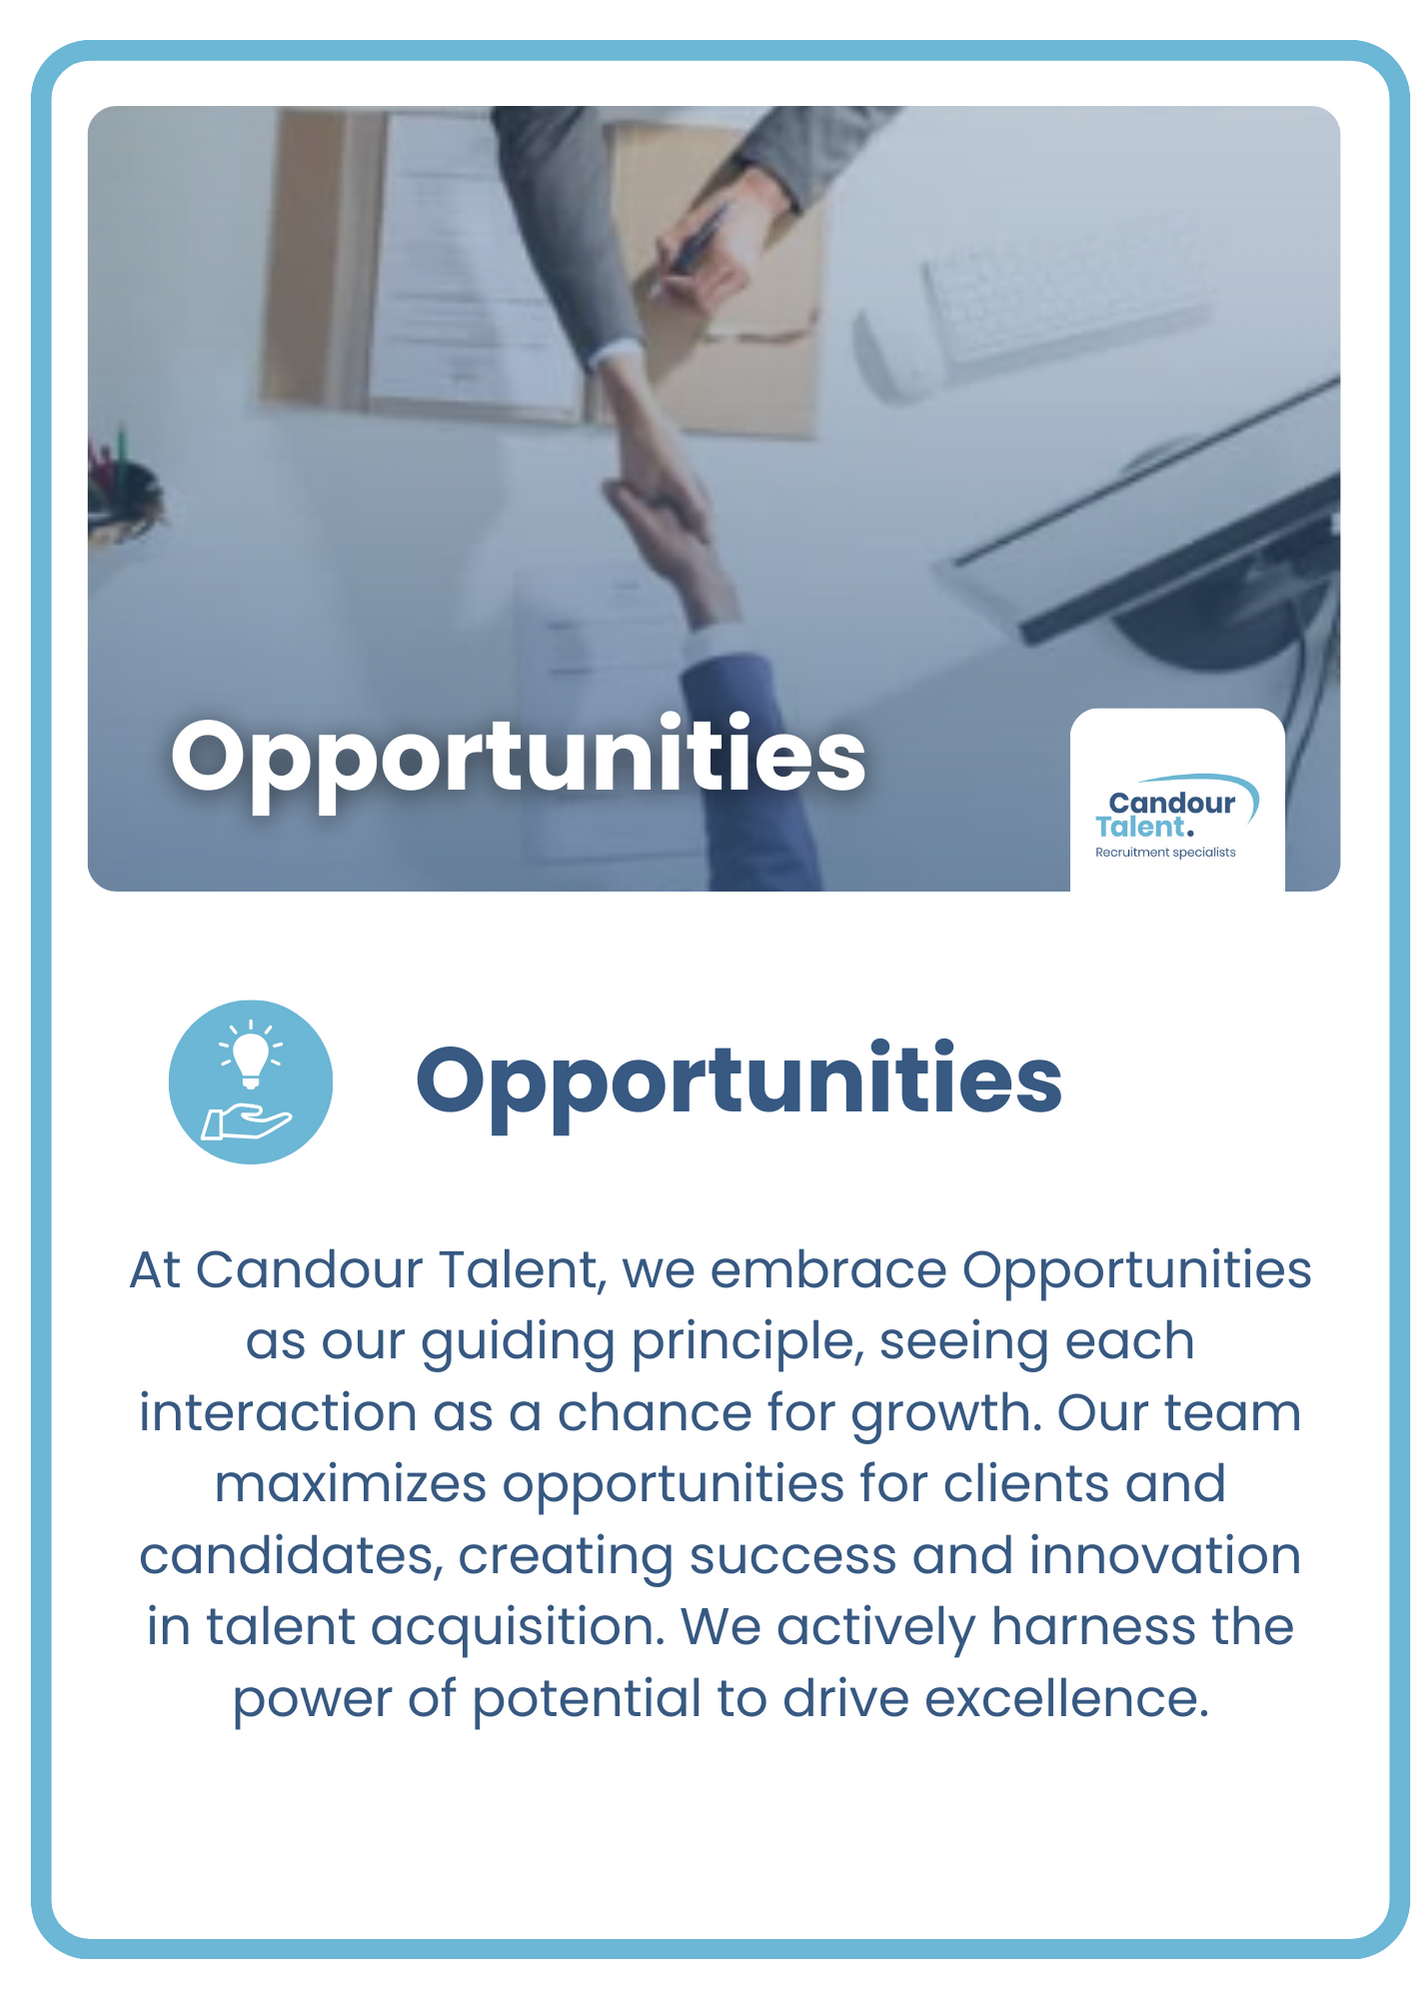 Candour Talent Recruitment Agency - Our Values page - our values of Opportunities. Text: At Candour Talent, we embrace Opportunities as our guiding principle, seeing each interaction as a chance for growth. Our team maximizes opportunities for clients and candidates, creating success and innovation in talent acquisition. We actively harness the power of potential to drive excellence